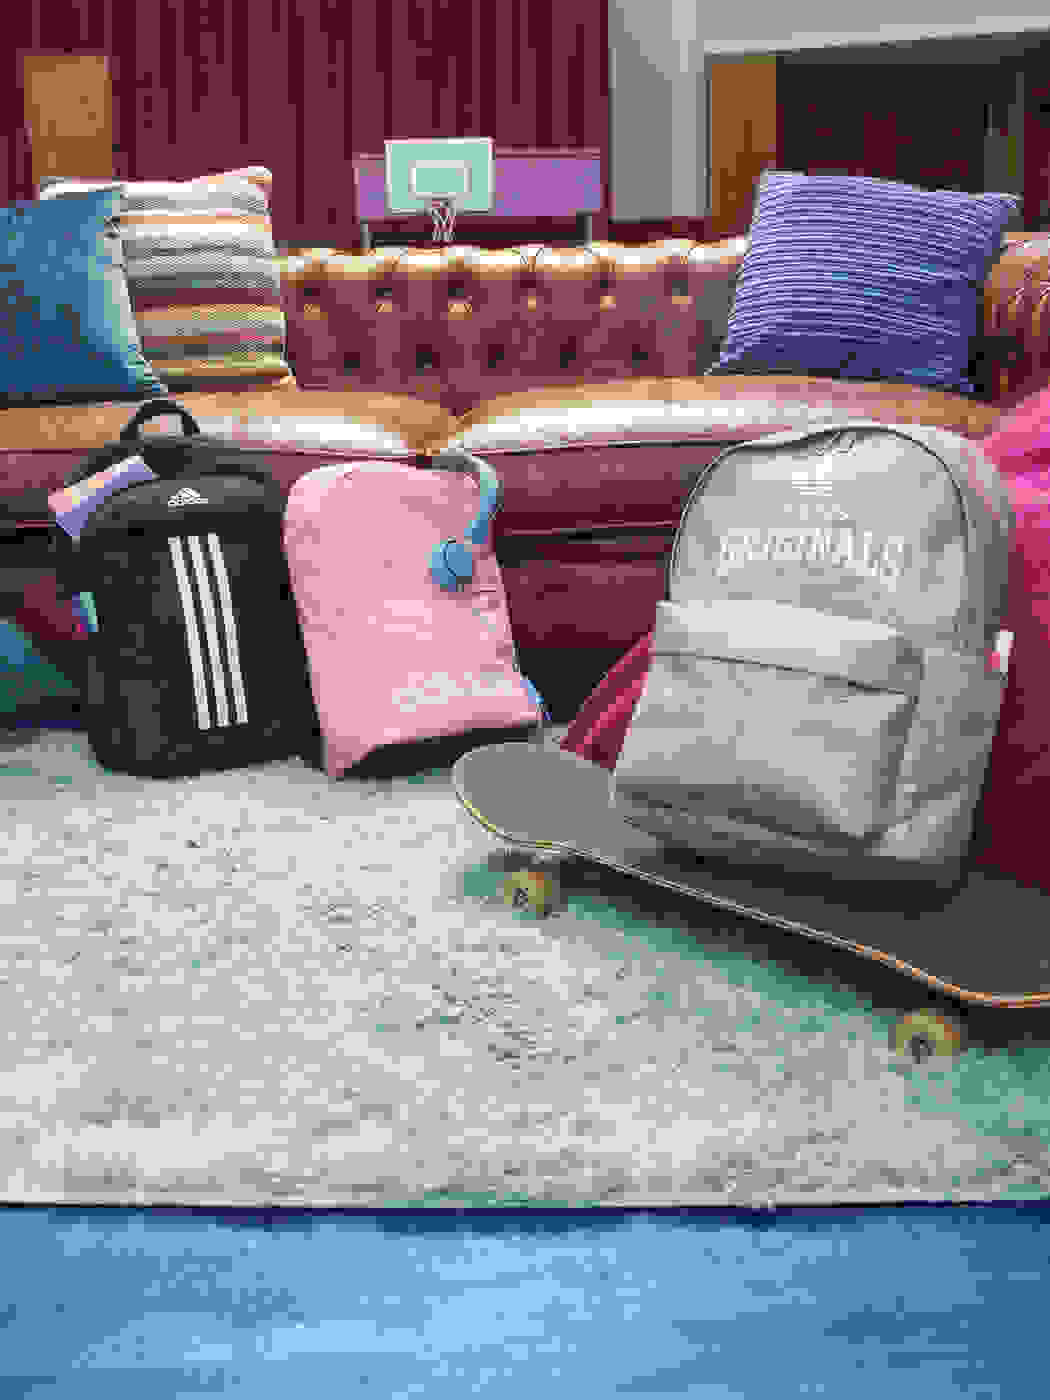 Three backpacks in front of couch inside school building